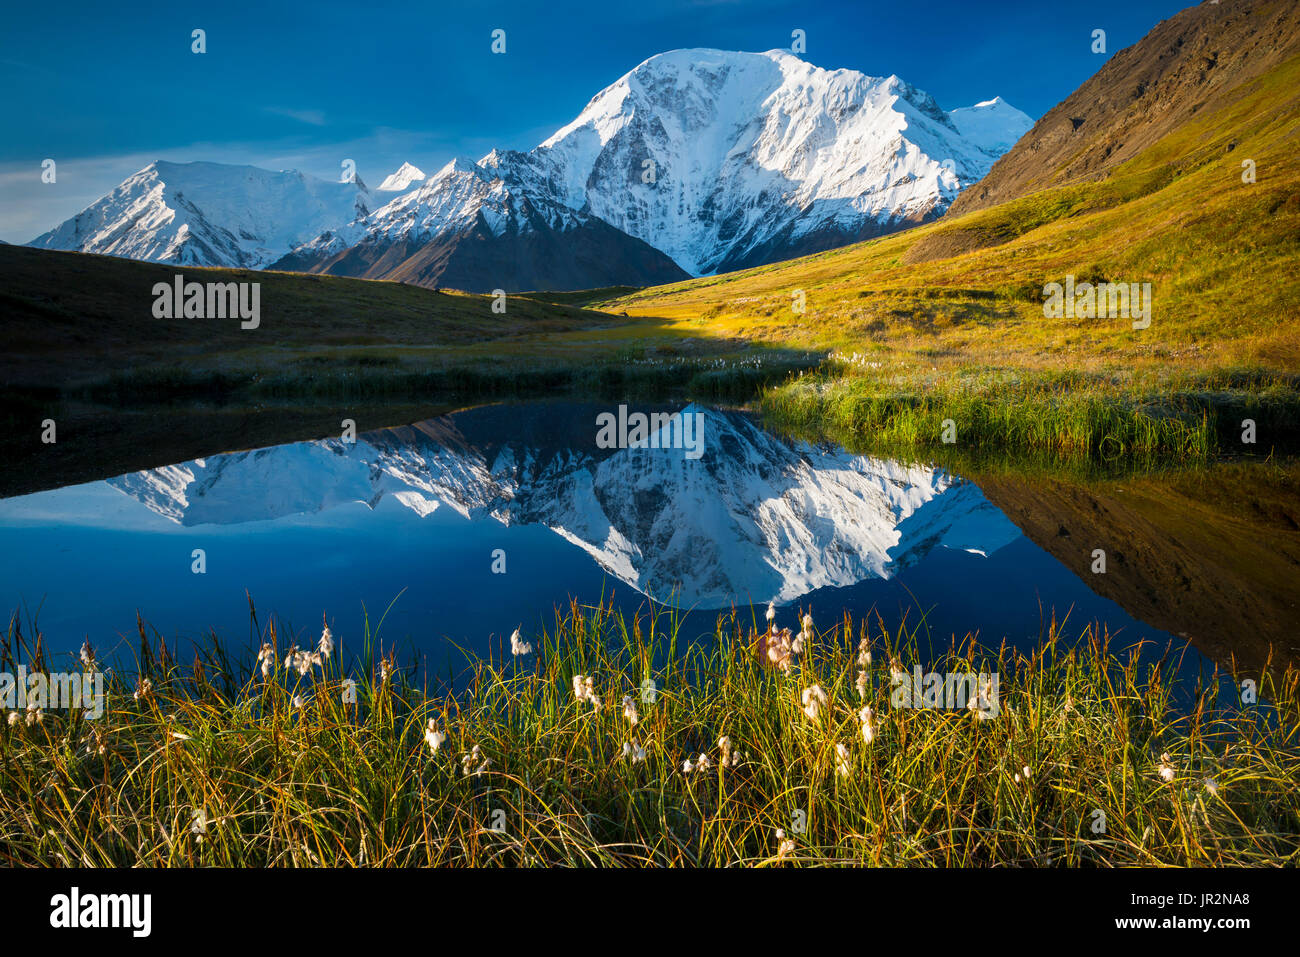 Scenic View Of Mt. Moffit Reflected In A Kettle Pond, Alaska Range, Interior Alaska, USA Stock Photo